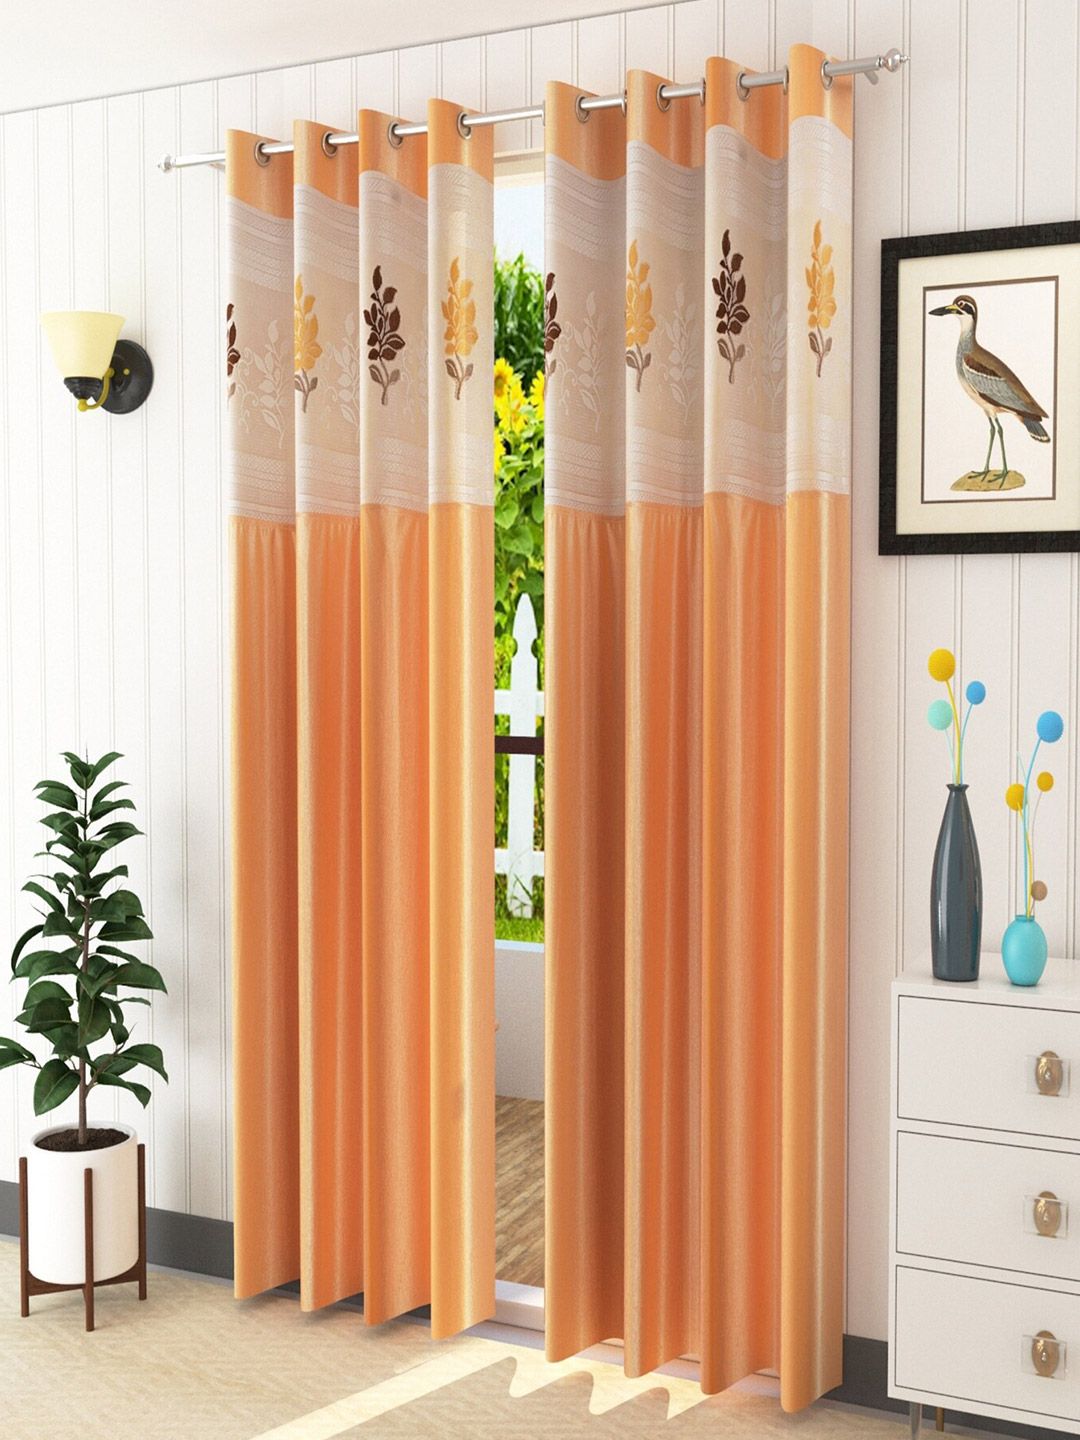 Homefab India Beige & White Set of 2 Floral Sheer Long Door Curtains- 9 Feet Price in India